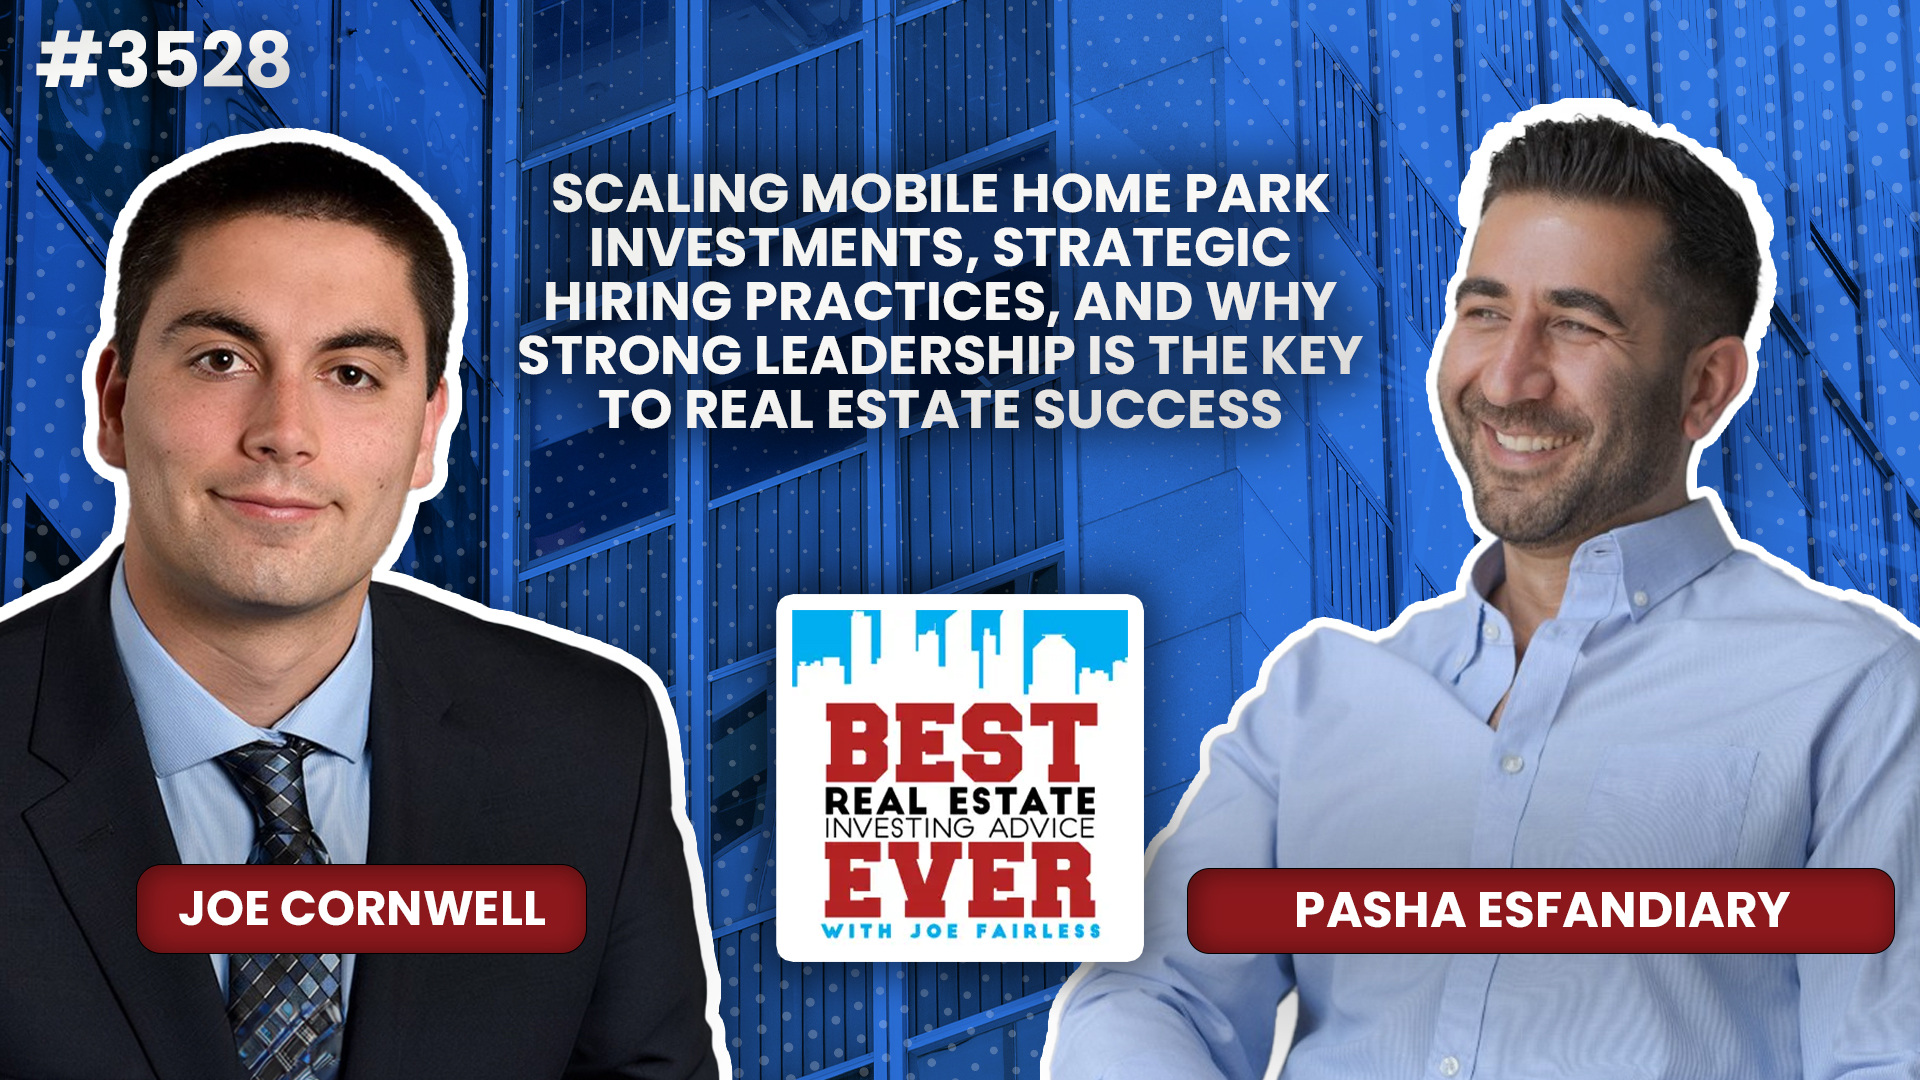 JF3528: Scaling Mobile Home Park Investments, Strategic Hiring Practices, and Why Strong Leadership Is the Key to Real Estate Success ft. Pasha Esfandiary